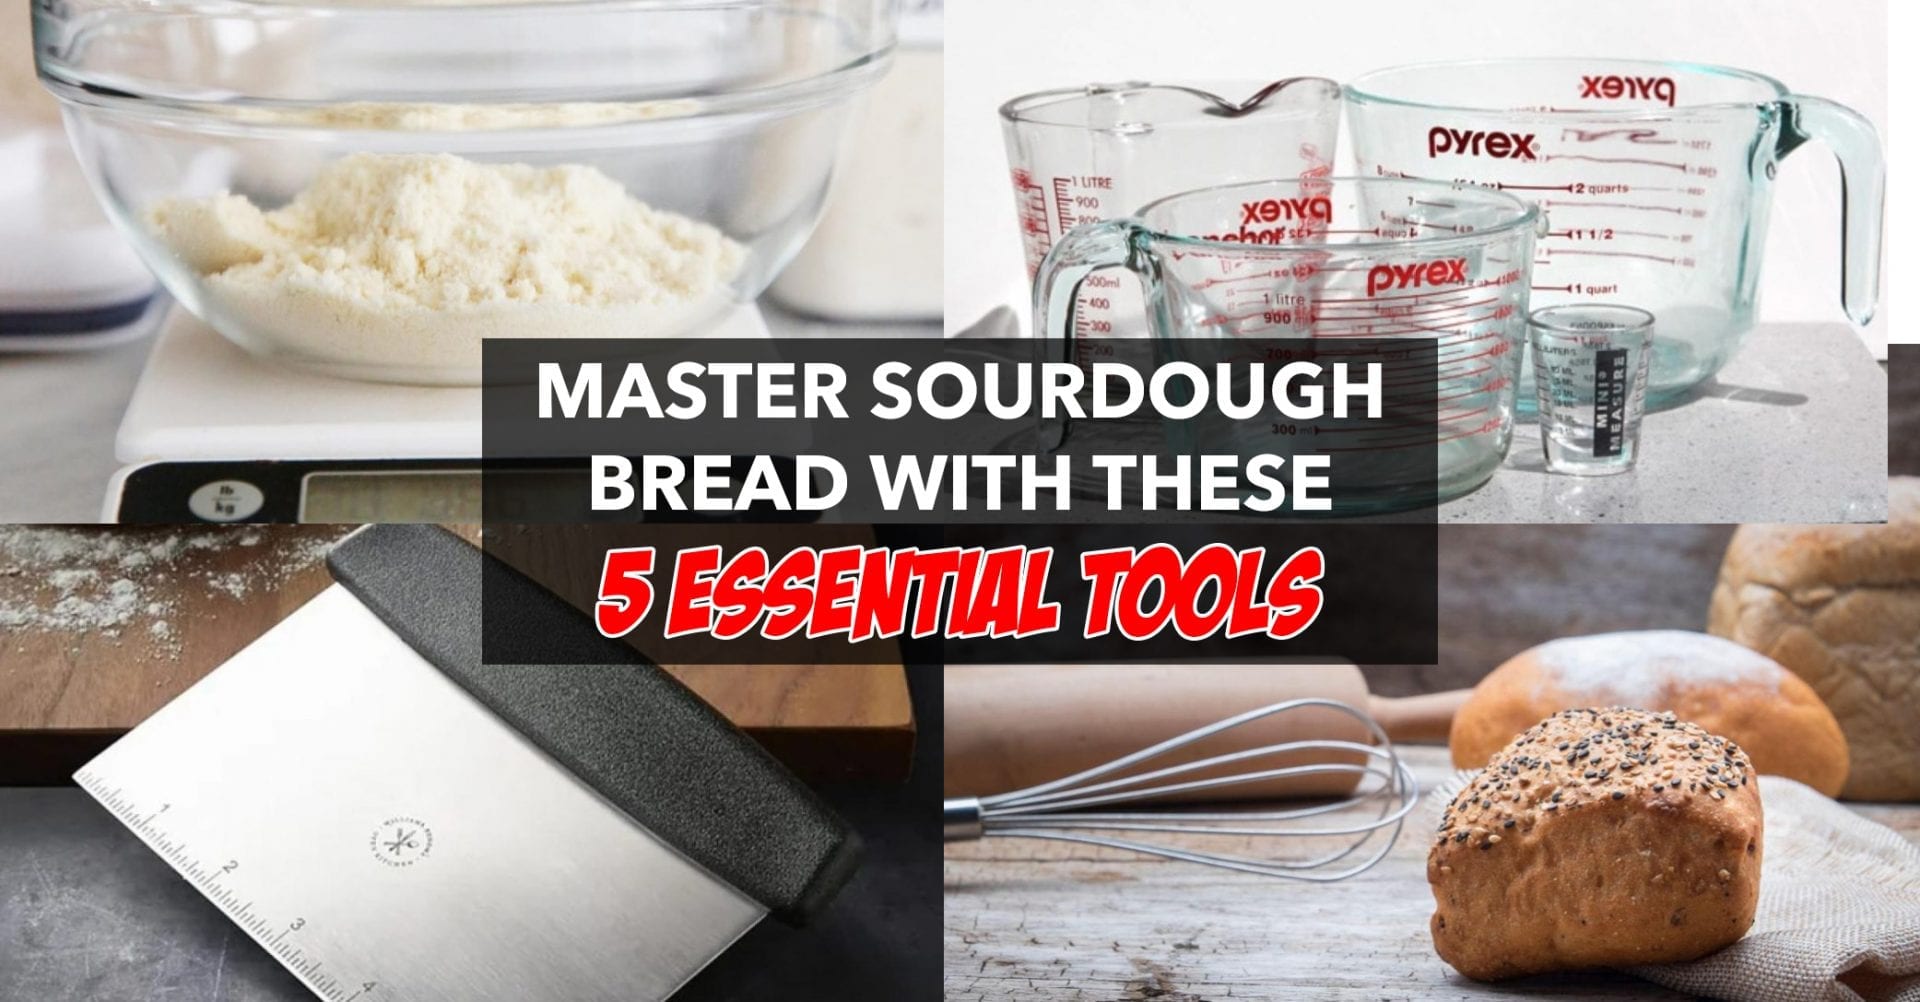 Master Sourdough Bread With These 5 Essential Tools 2